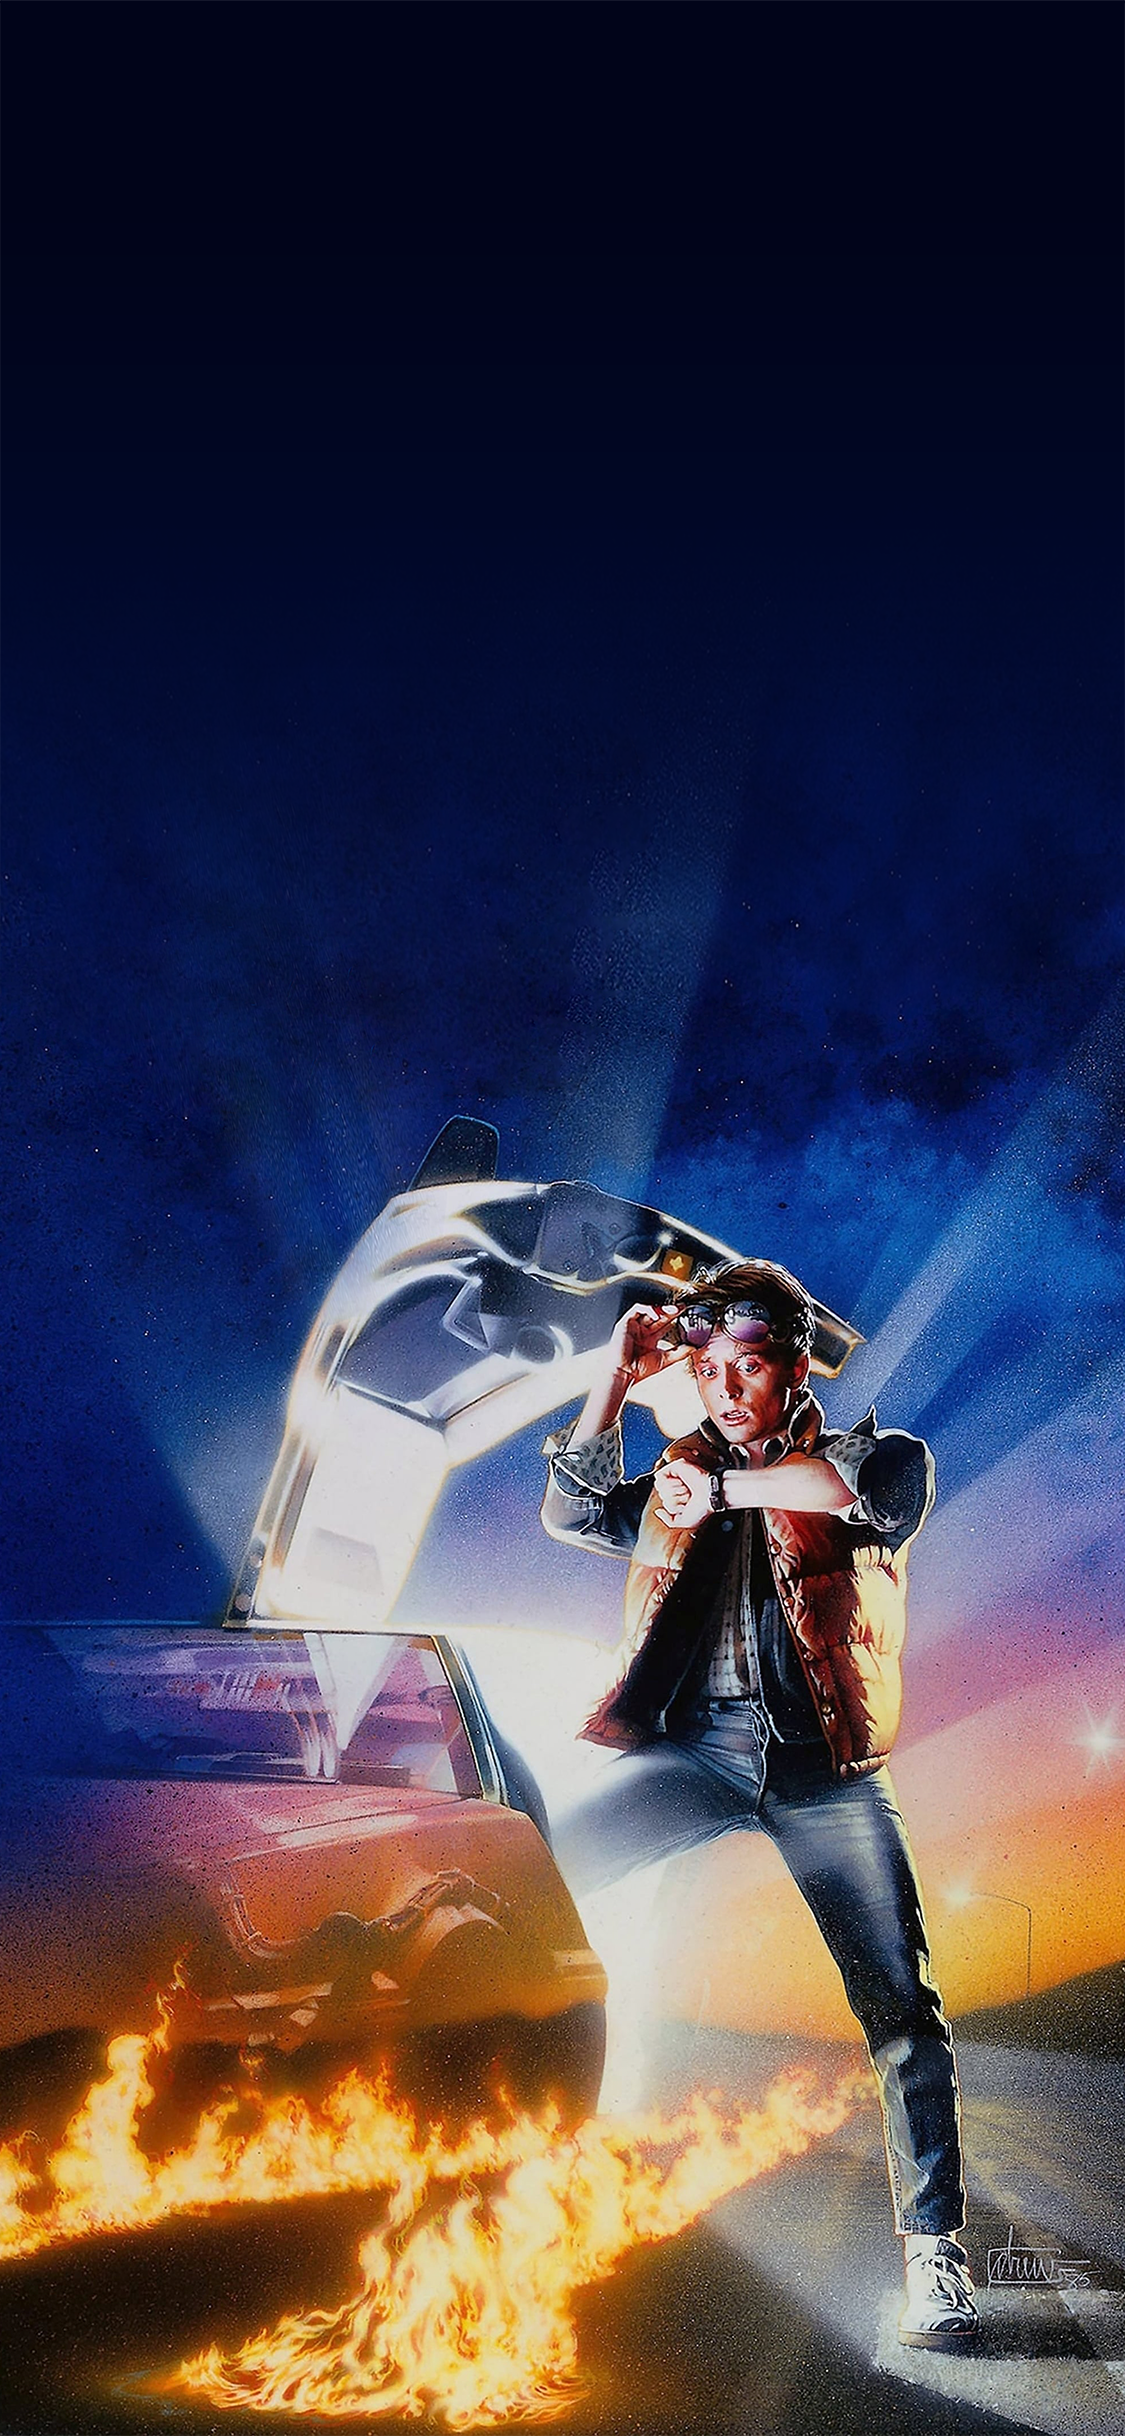 I removed the text from the Back to the Future film posters and converted them into mobile wallpaper